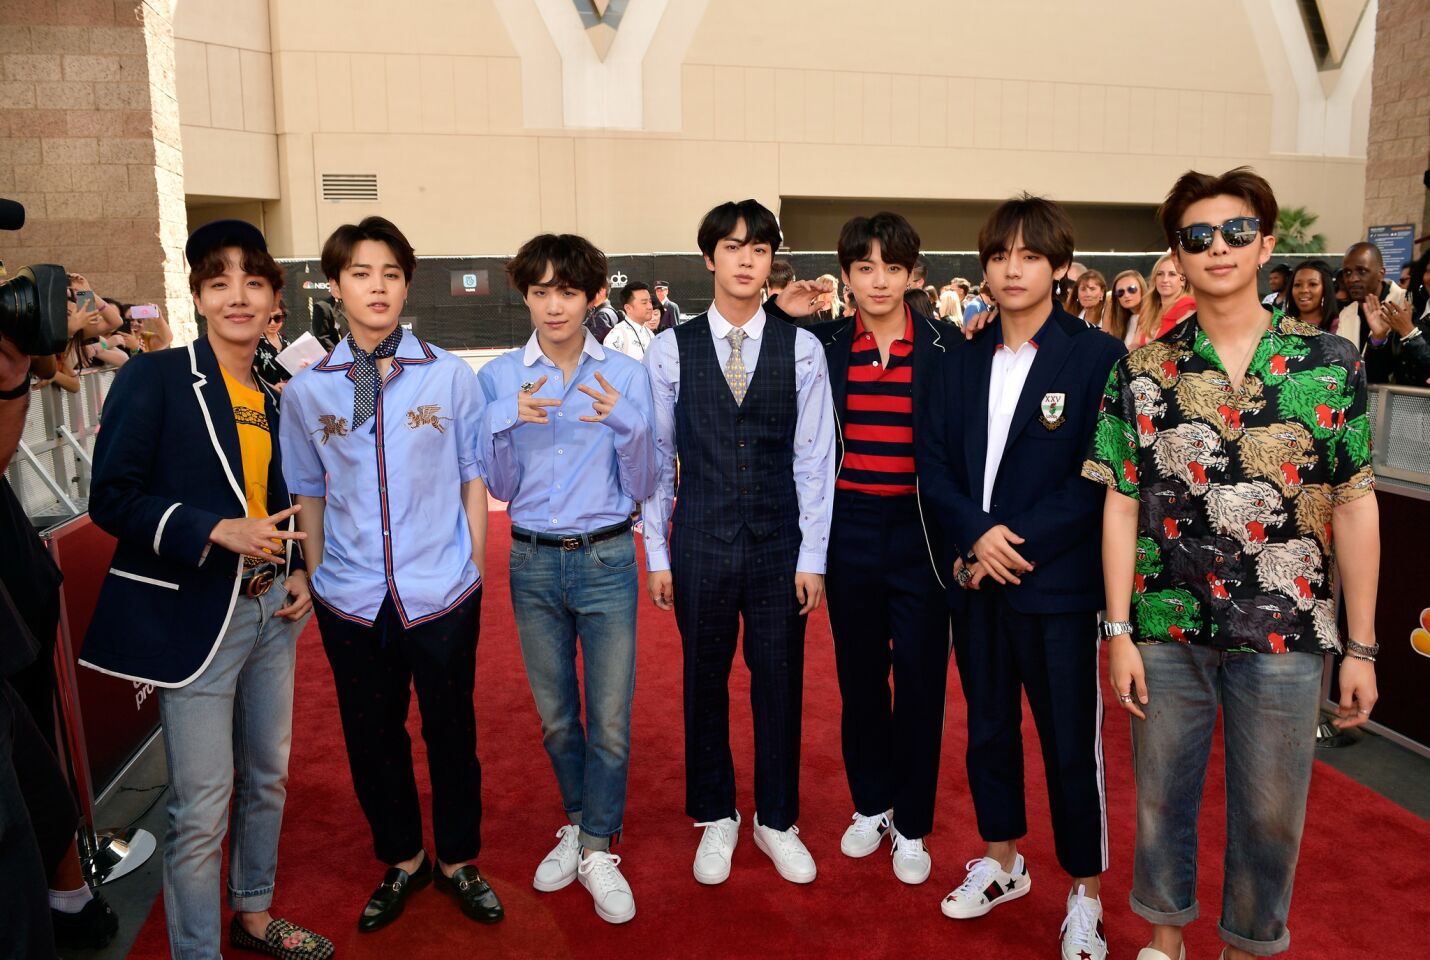 Musical group BTS attends the 2018 Billboard Music Awards at MGM Grand Garden Arena.